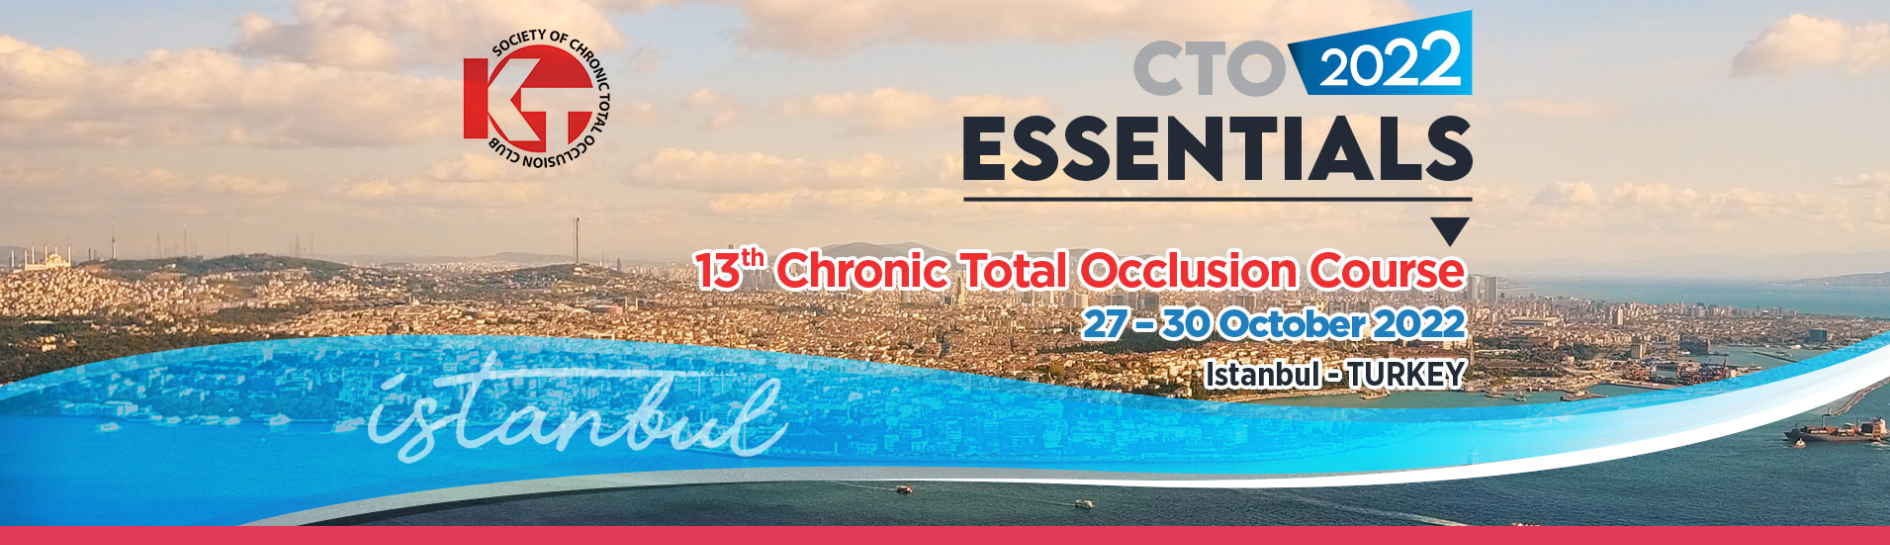 CTO Essentials – 13. Chronic Total Occlusion Course